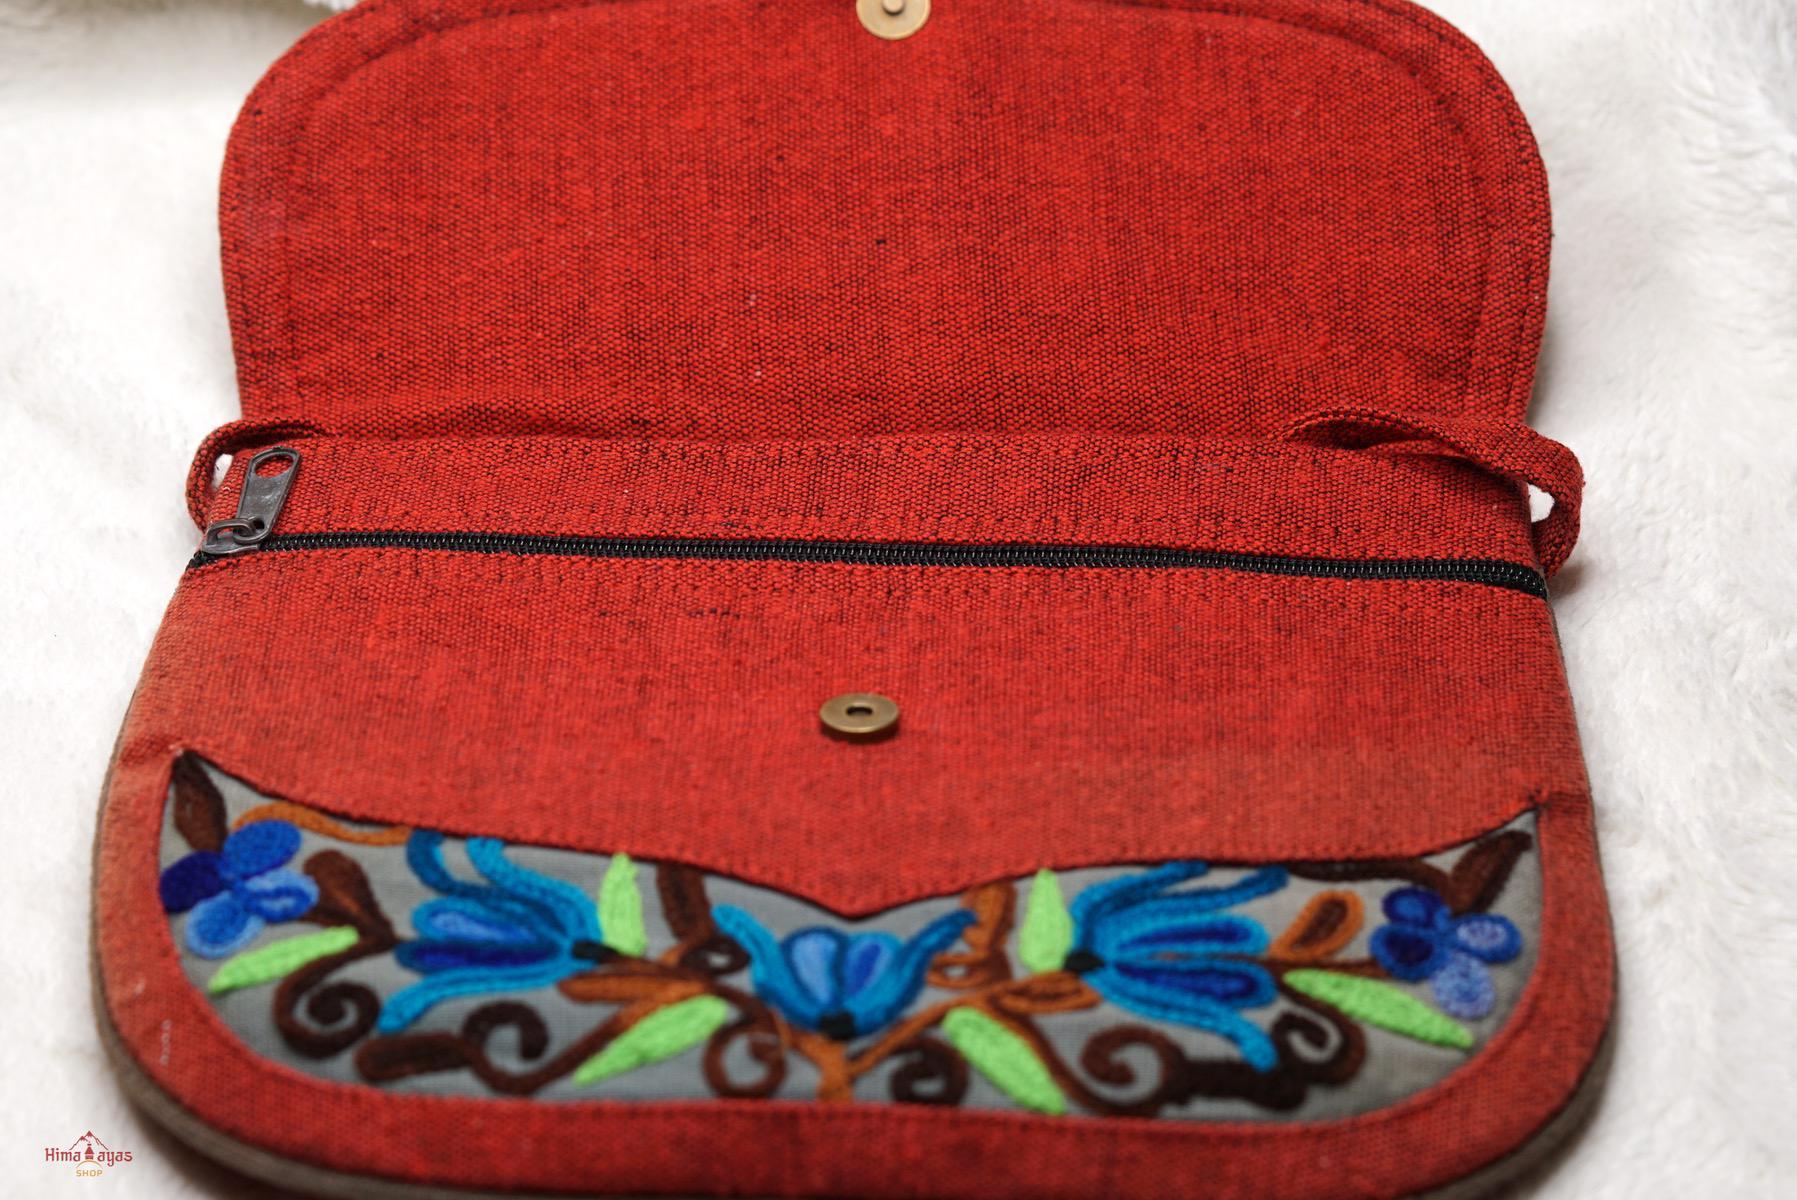 A stylist women’s crossbody bag for everyday use, handmade and kashmiri embroidery design for boho style. 